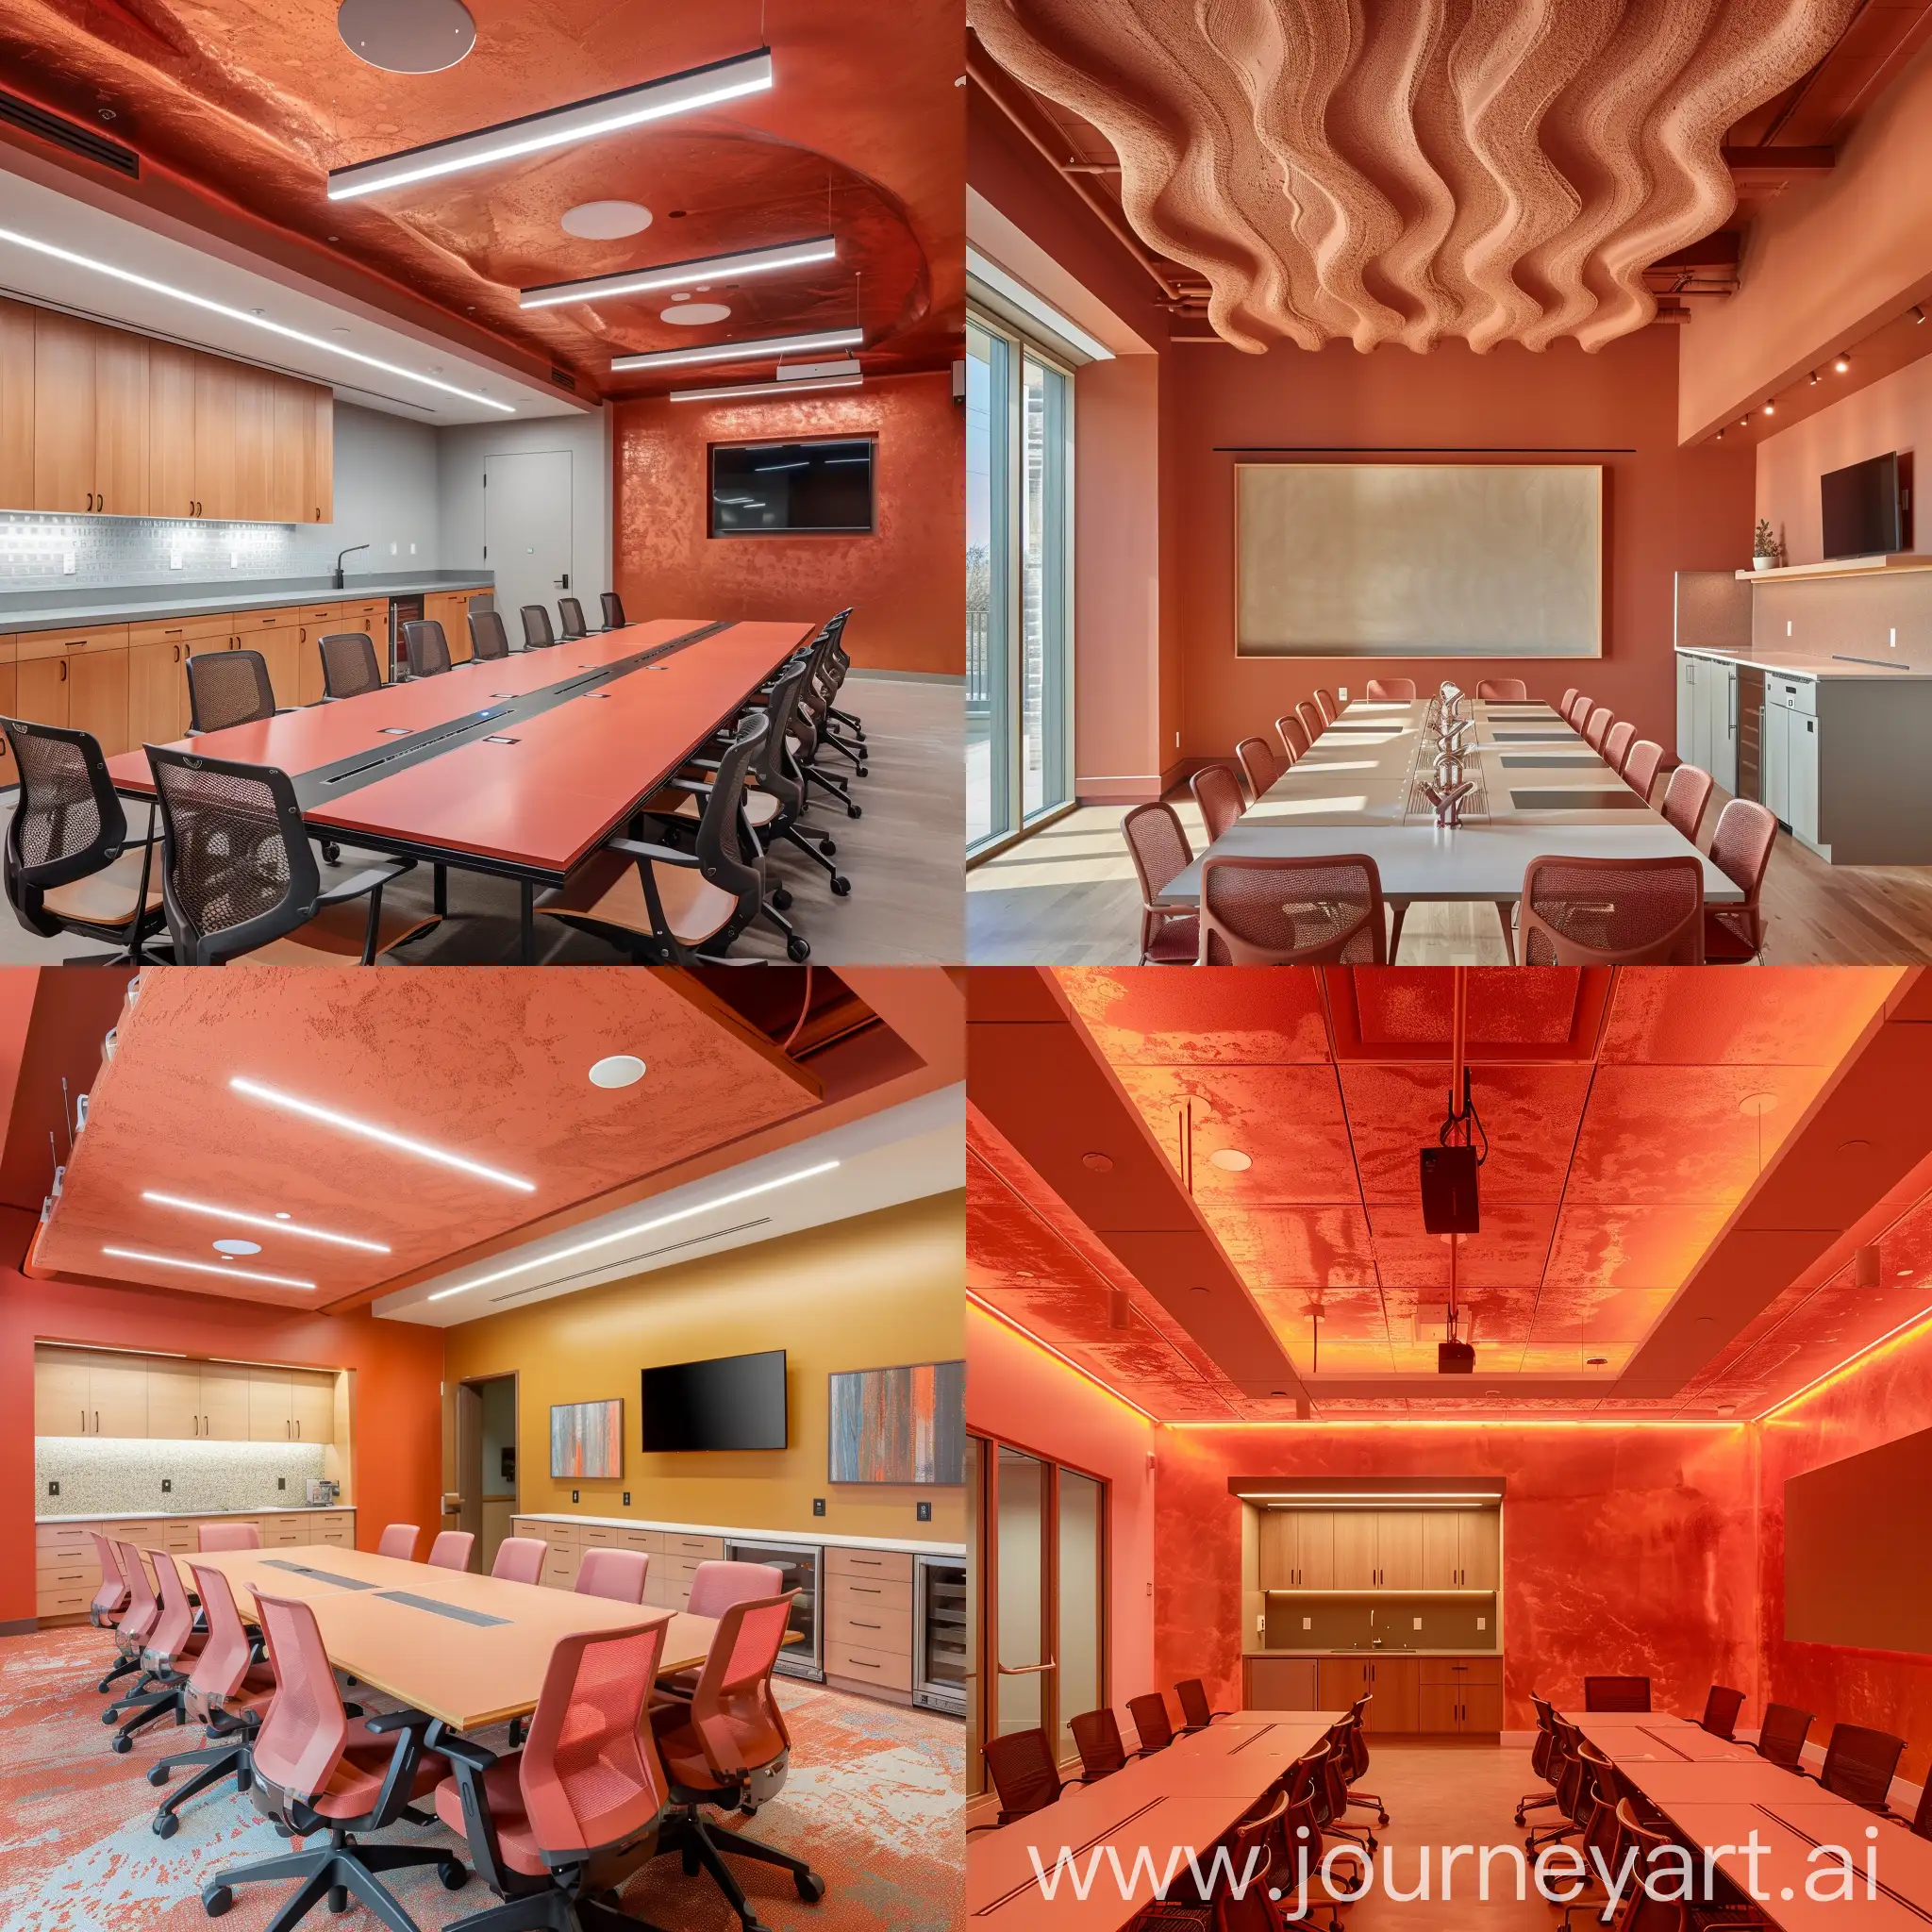 boardroom with a light red terracota color scheme, a clay plaster ceiling in the space, flexible seating configuration, teaching wall and a kitchenette.